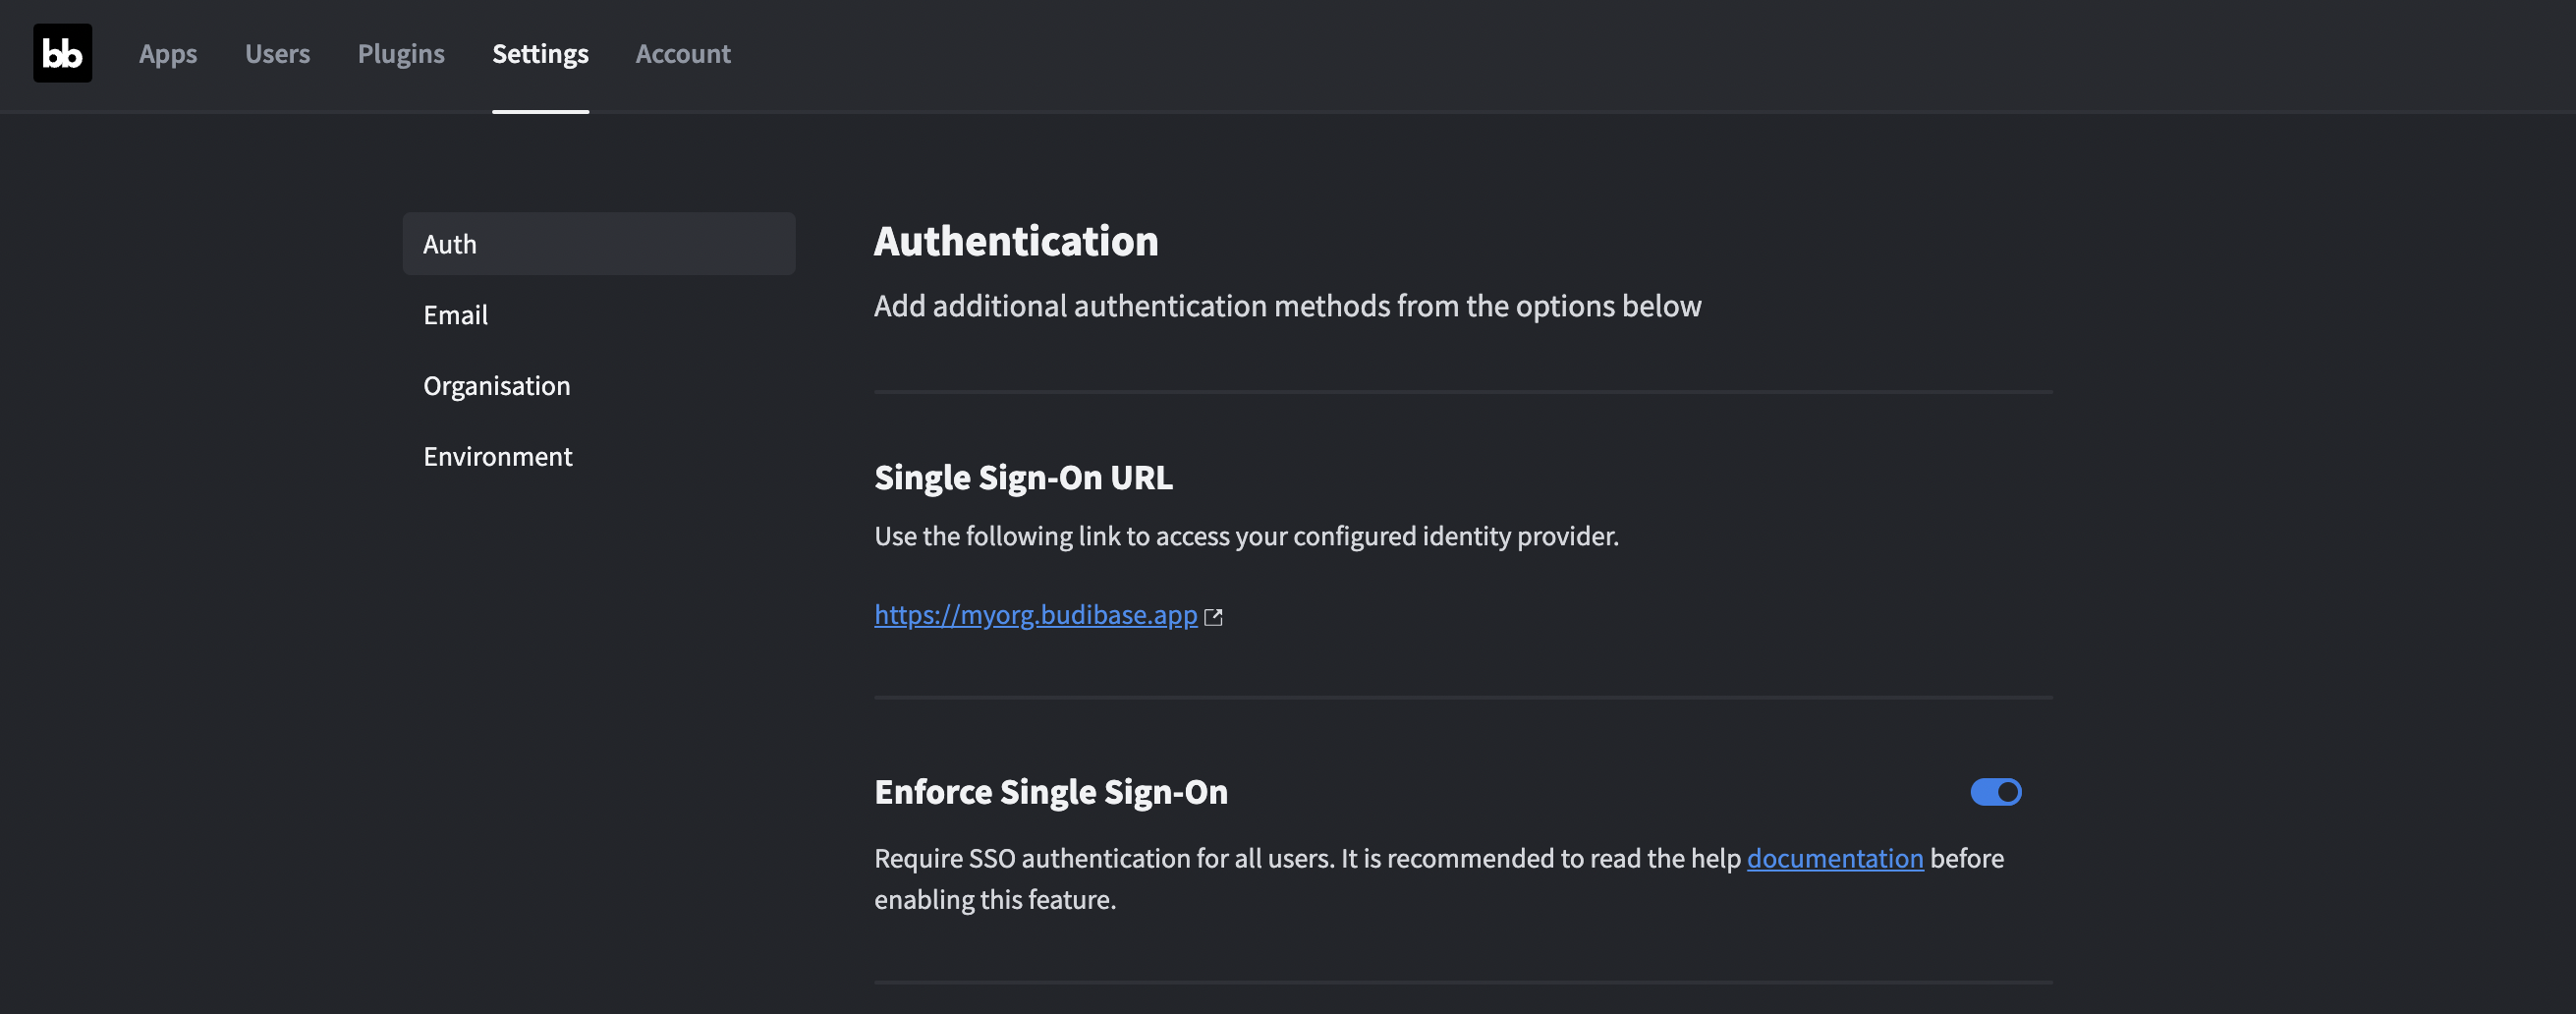 Enforce SSO in the Auth settings